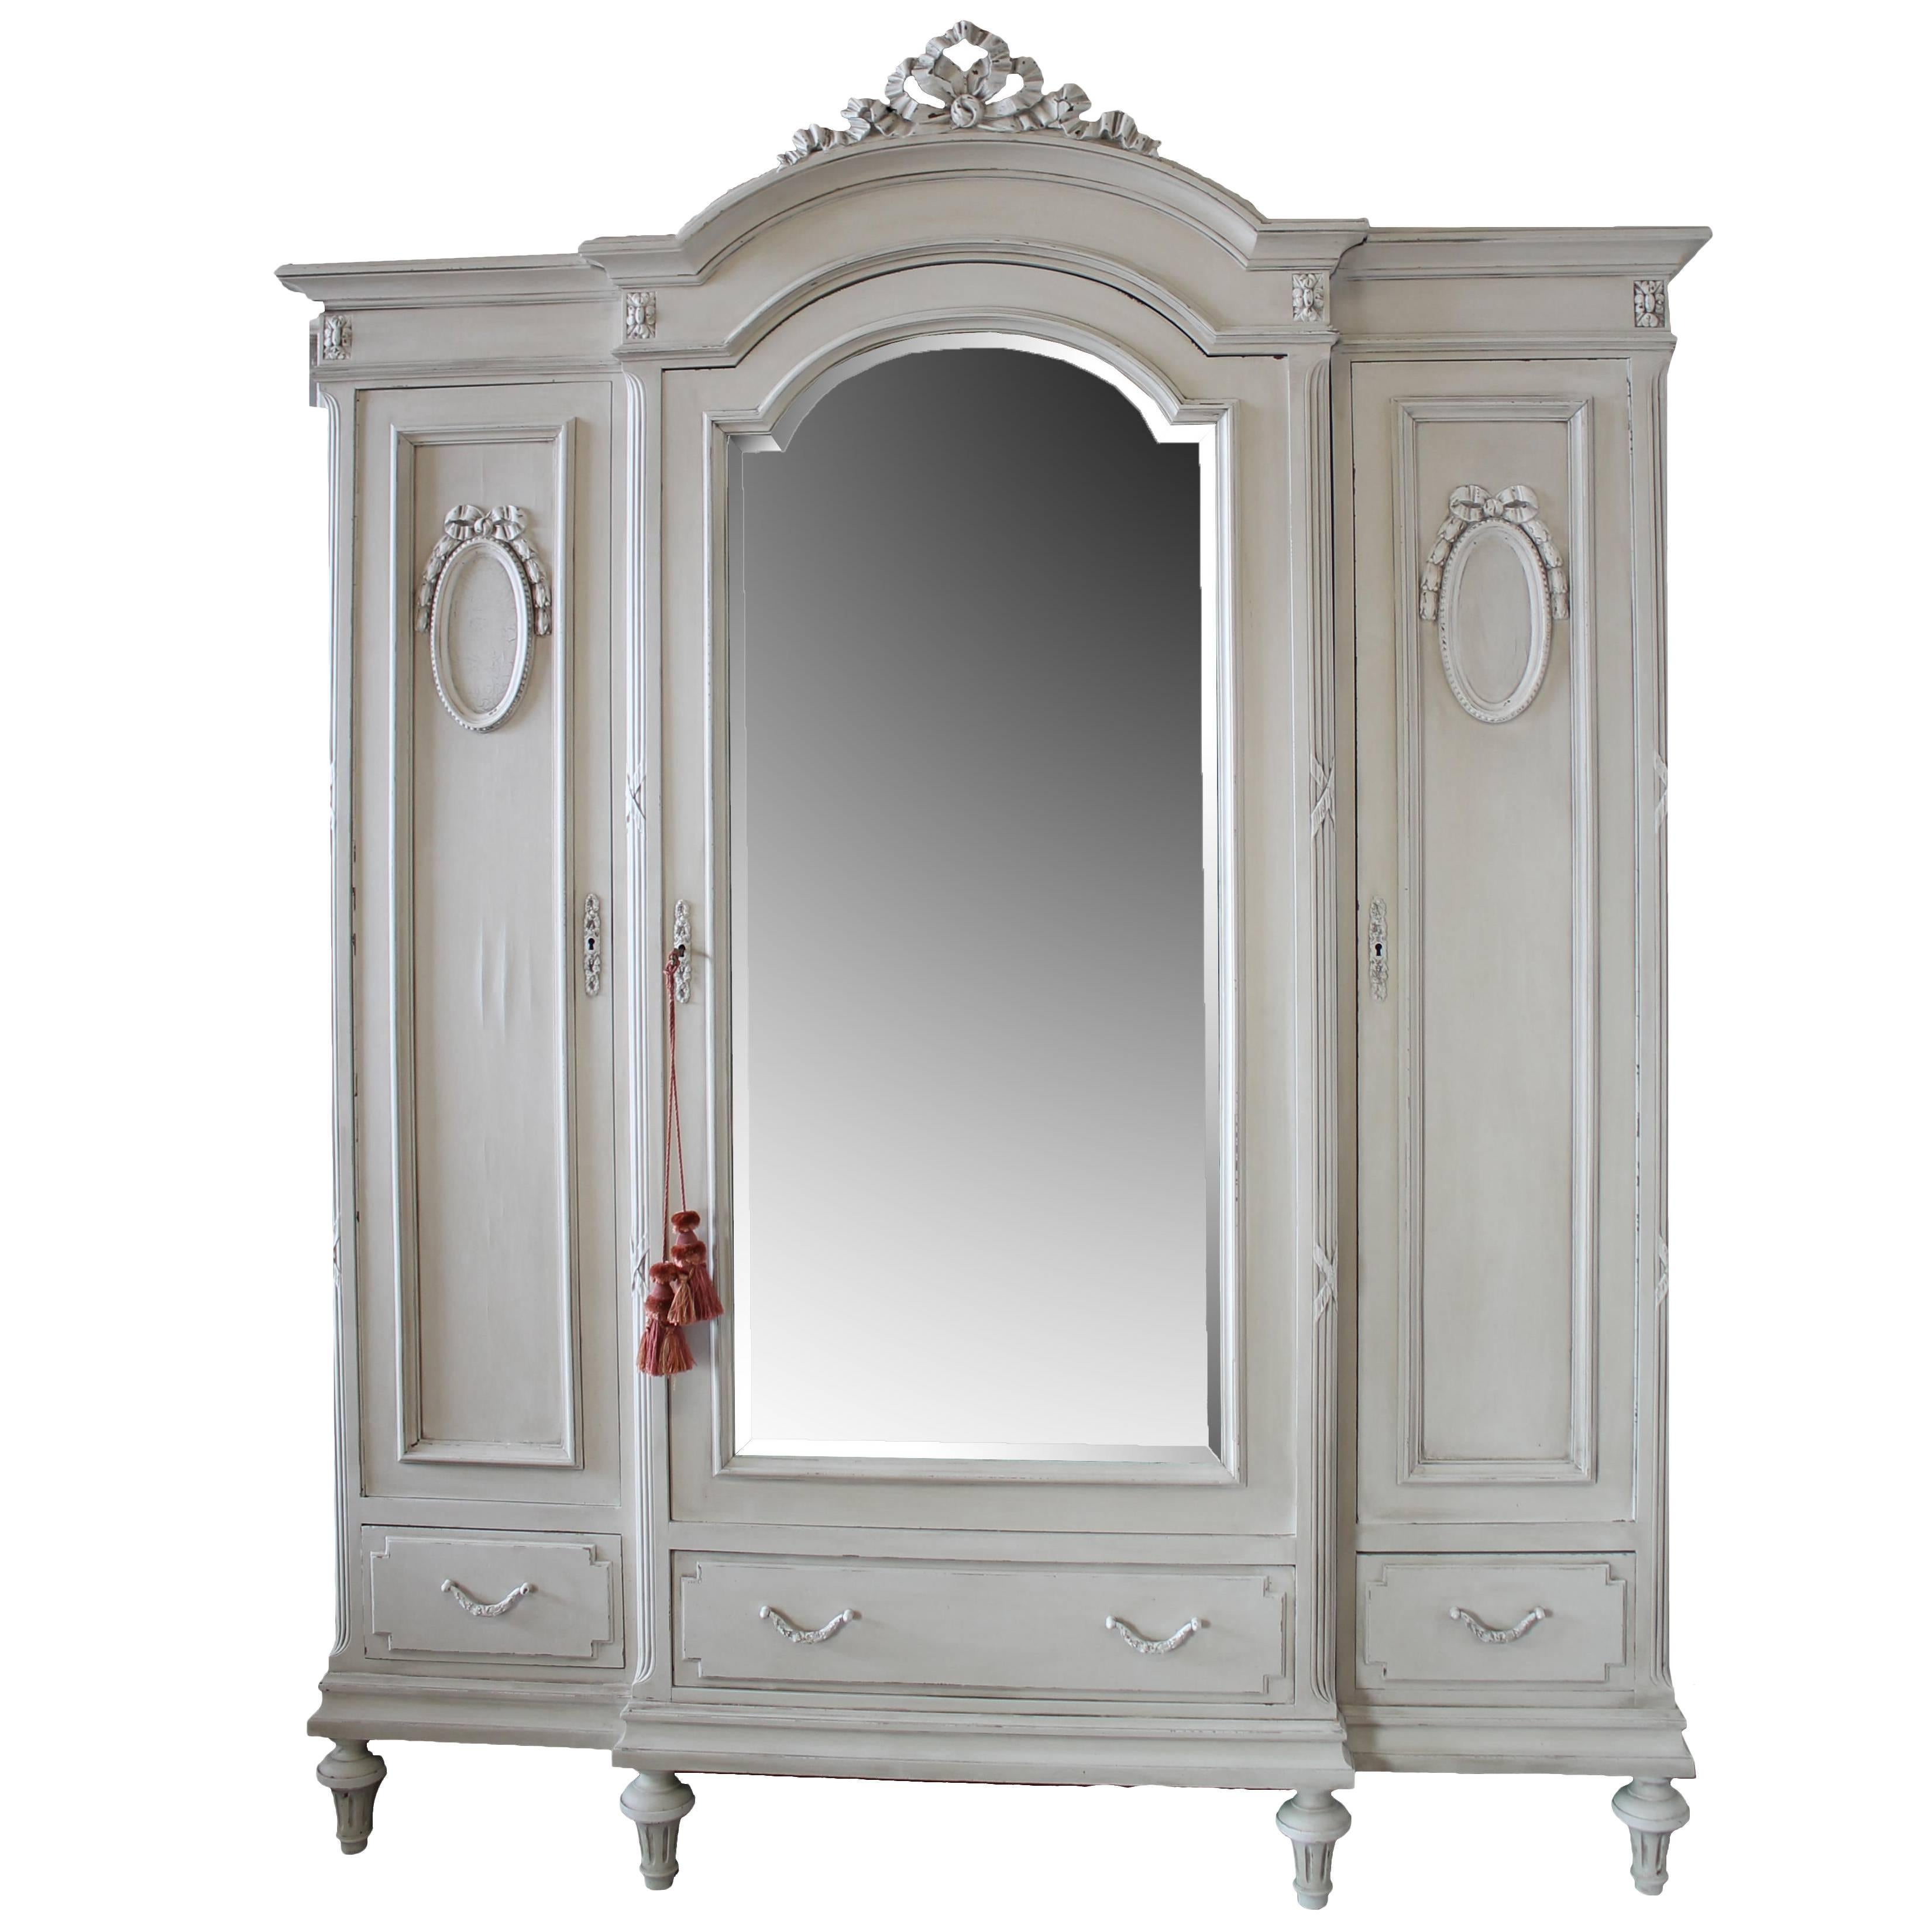 Antique Painted French Country Armoire in the Louis XVI Style 